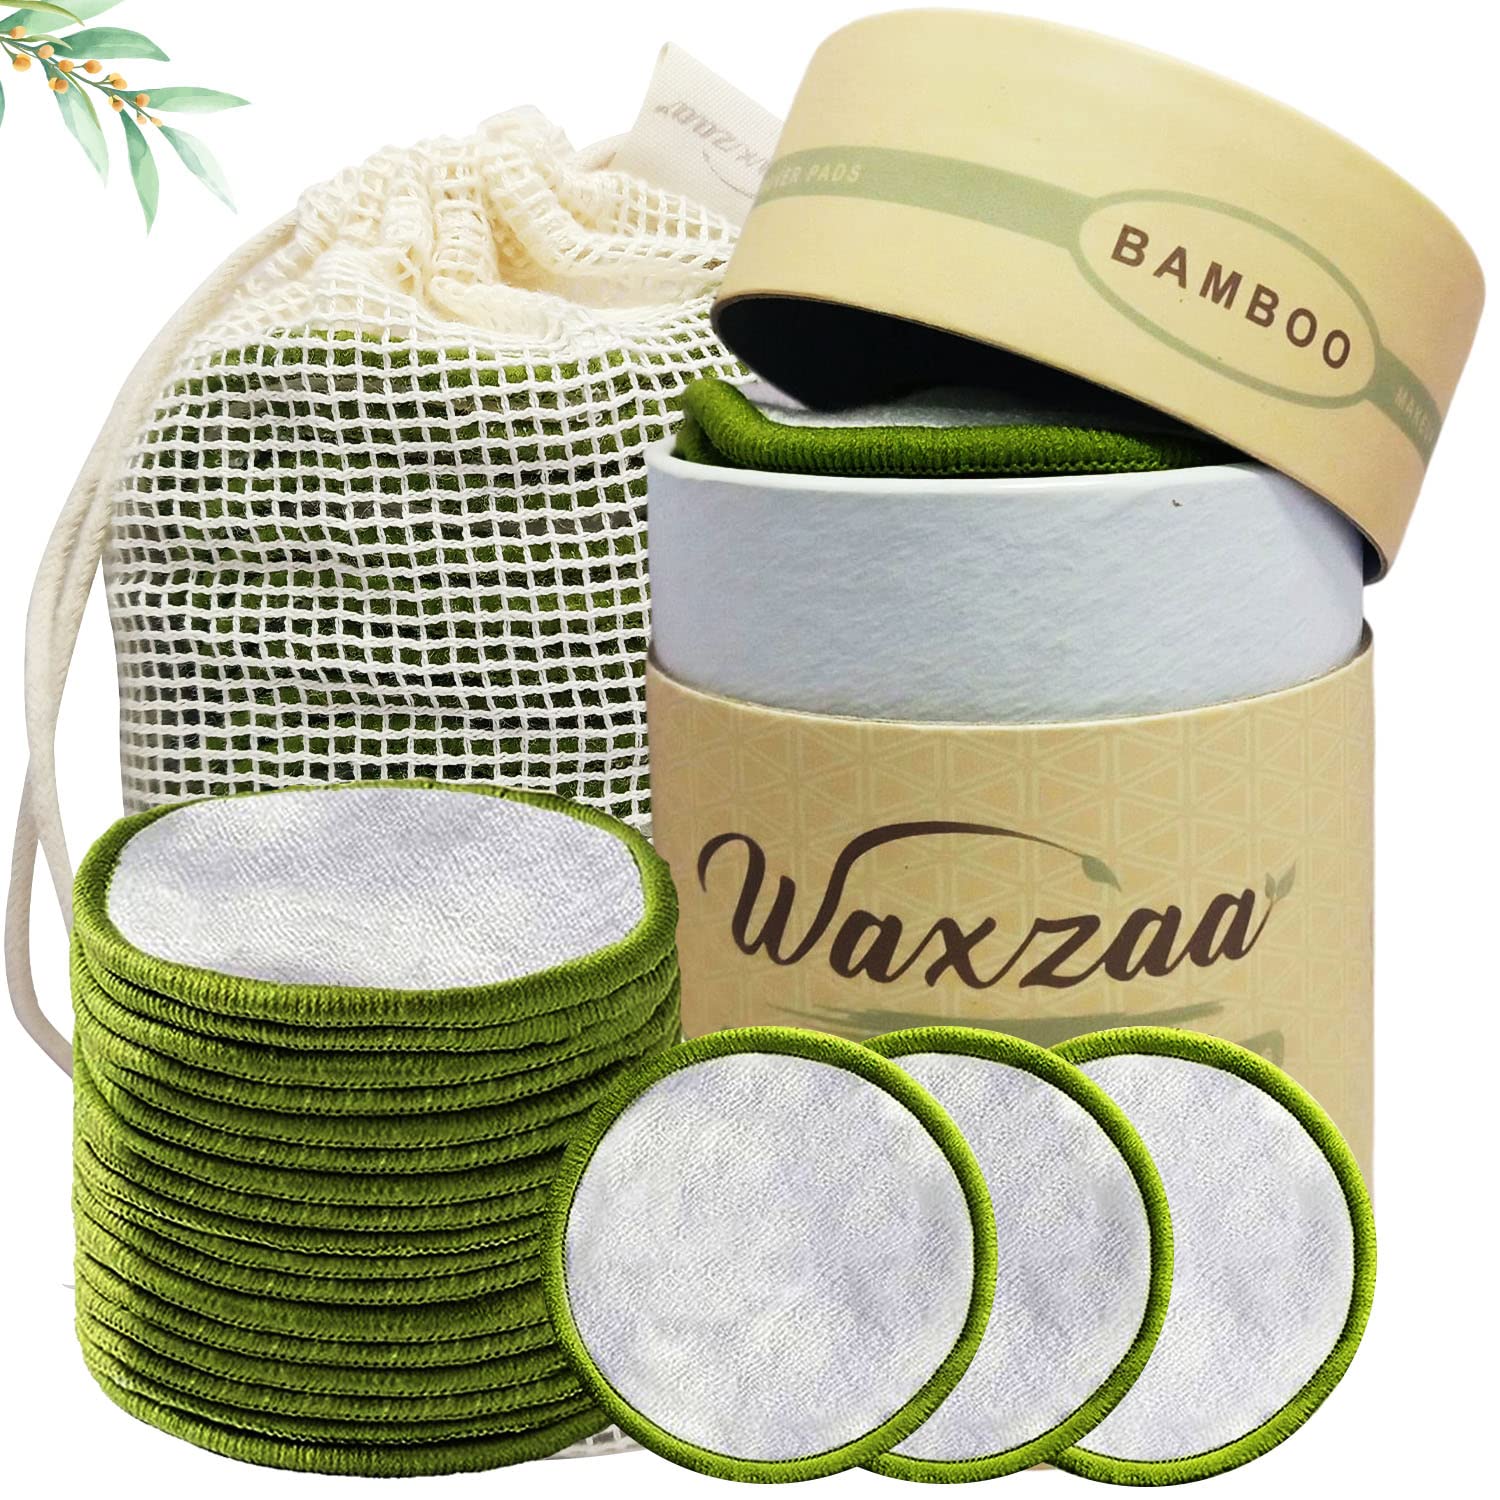 Waxzaa Reusable Makeup Remover Pads 23 Pack 100% Organic Reusable Cotton Pads Bamboo Face Pads with washable Laundry Bag & Storage, Eco Friendly Face Beauty Products for All Skin Types Adults & Kids